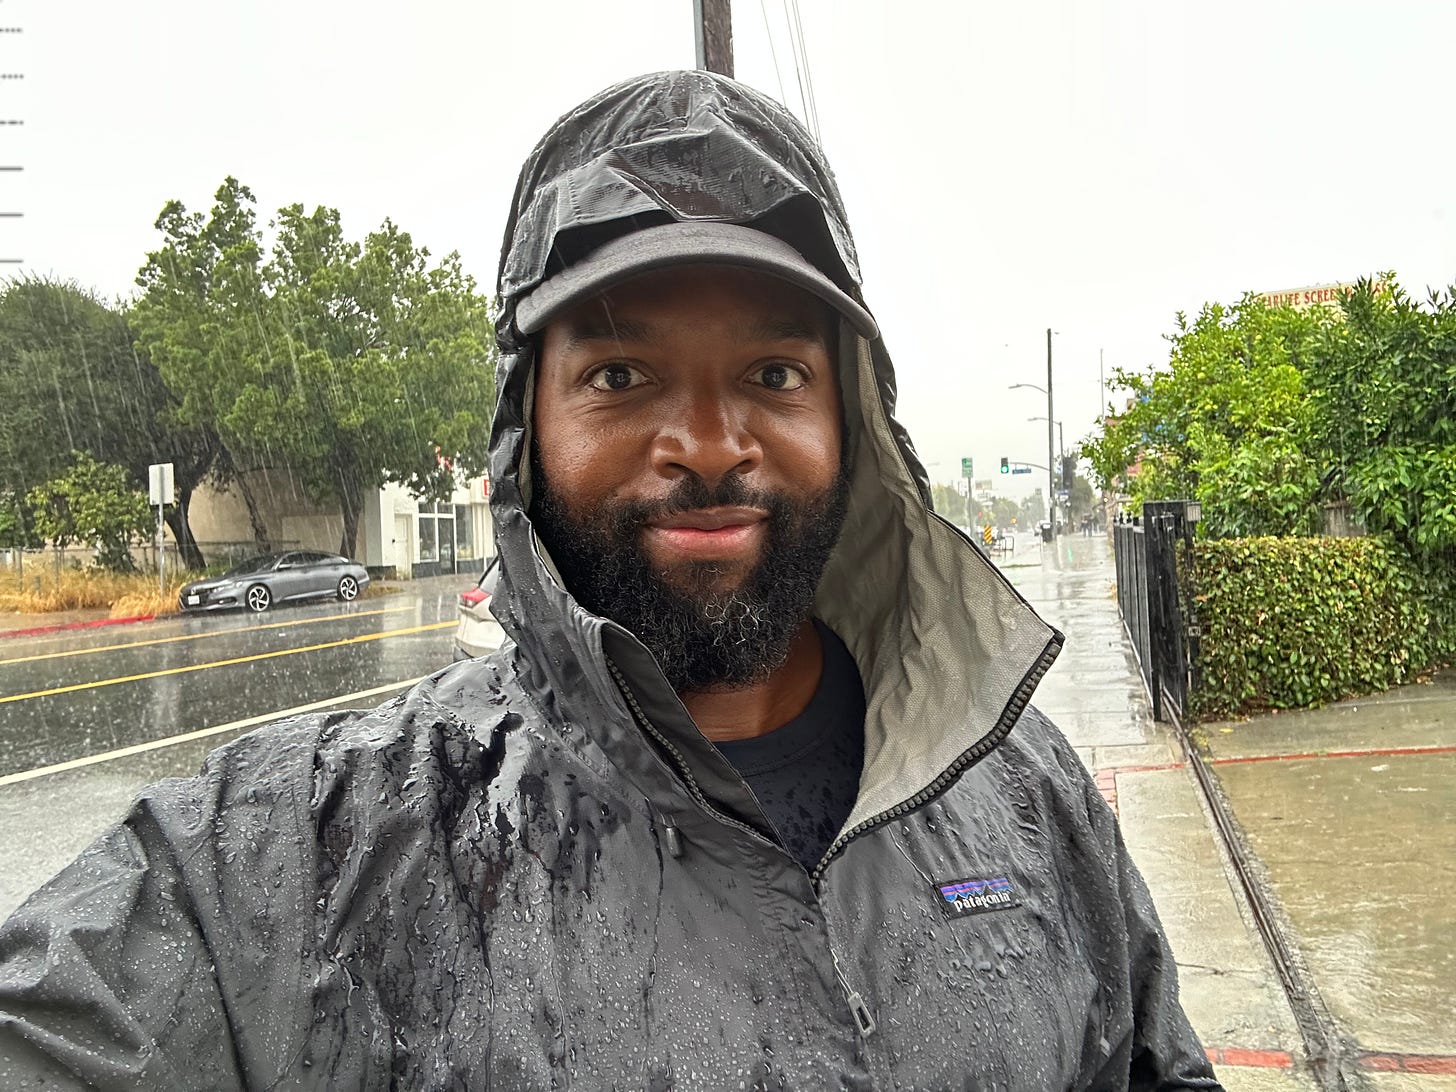 Baratunde in gray patagonia rain jacket during Tropical Storm Hilary downpour. looking at camera self satisfied. 